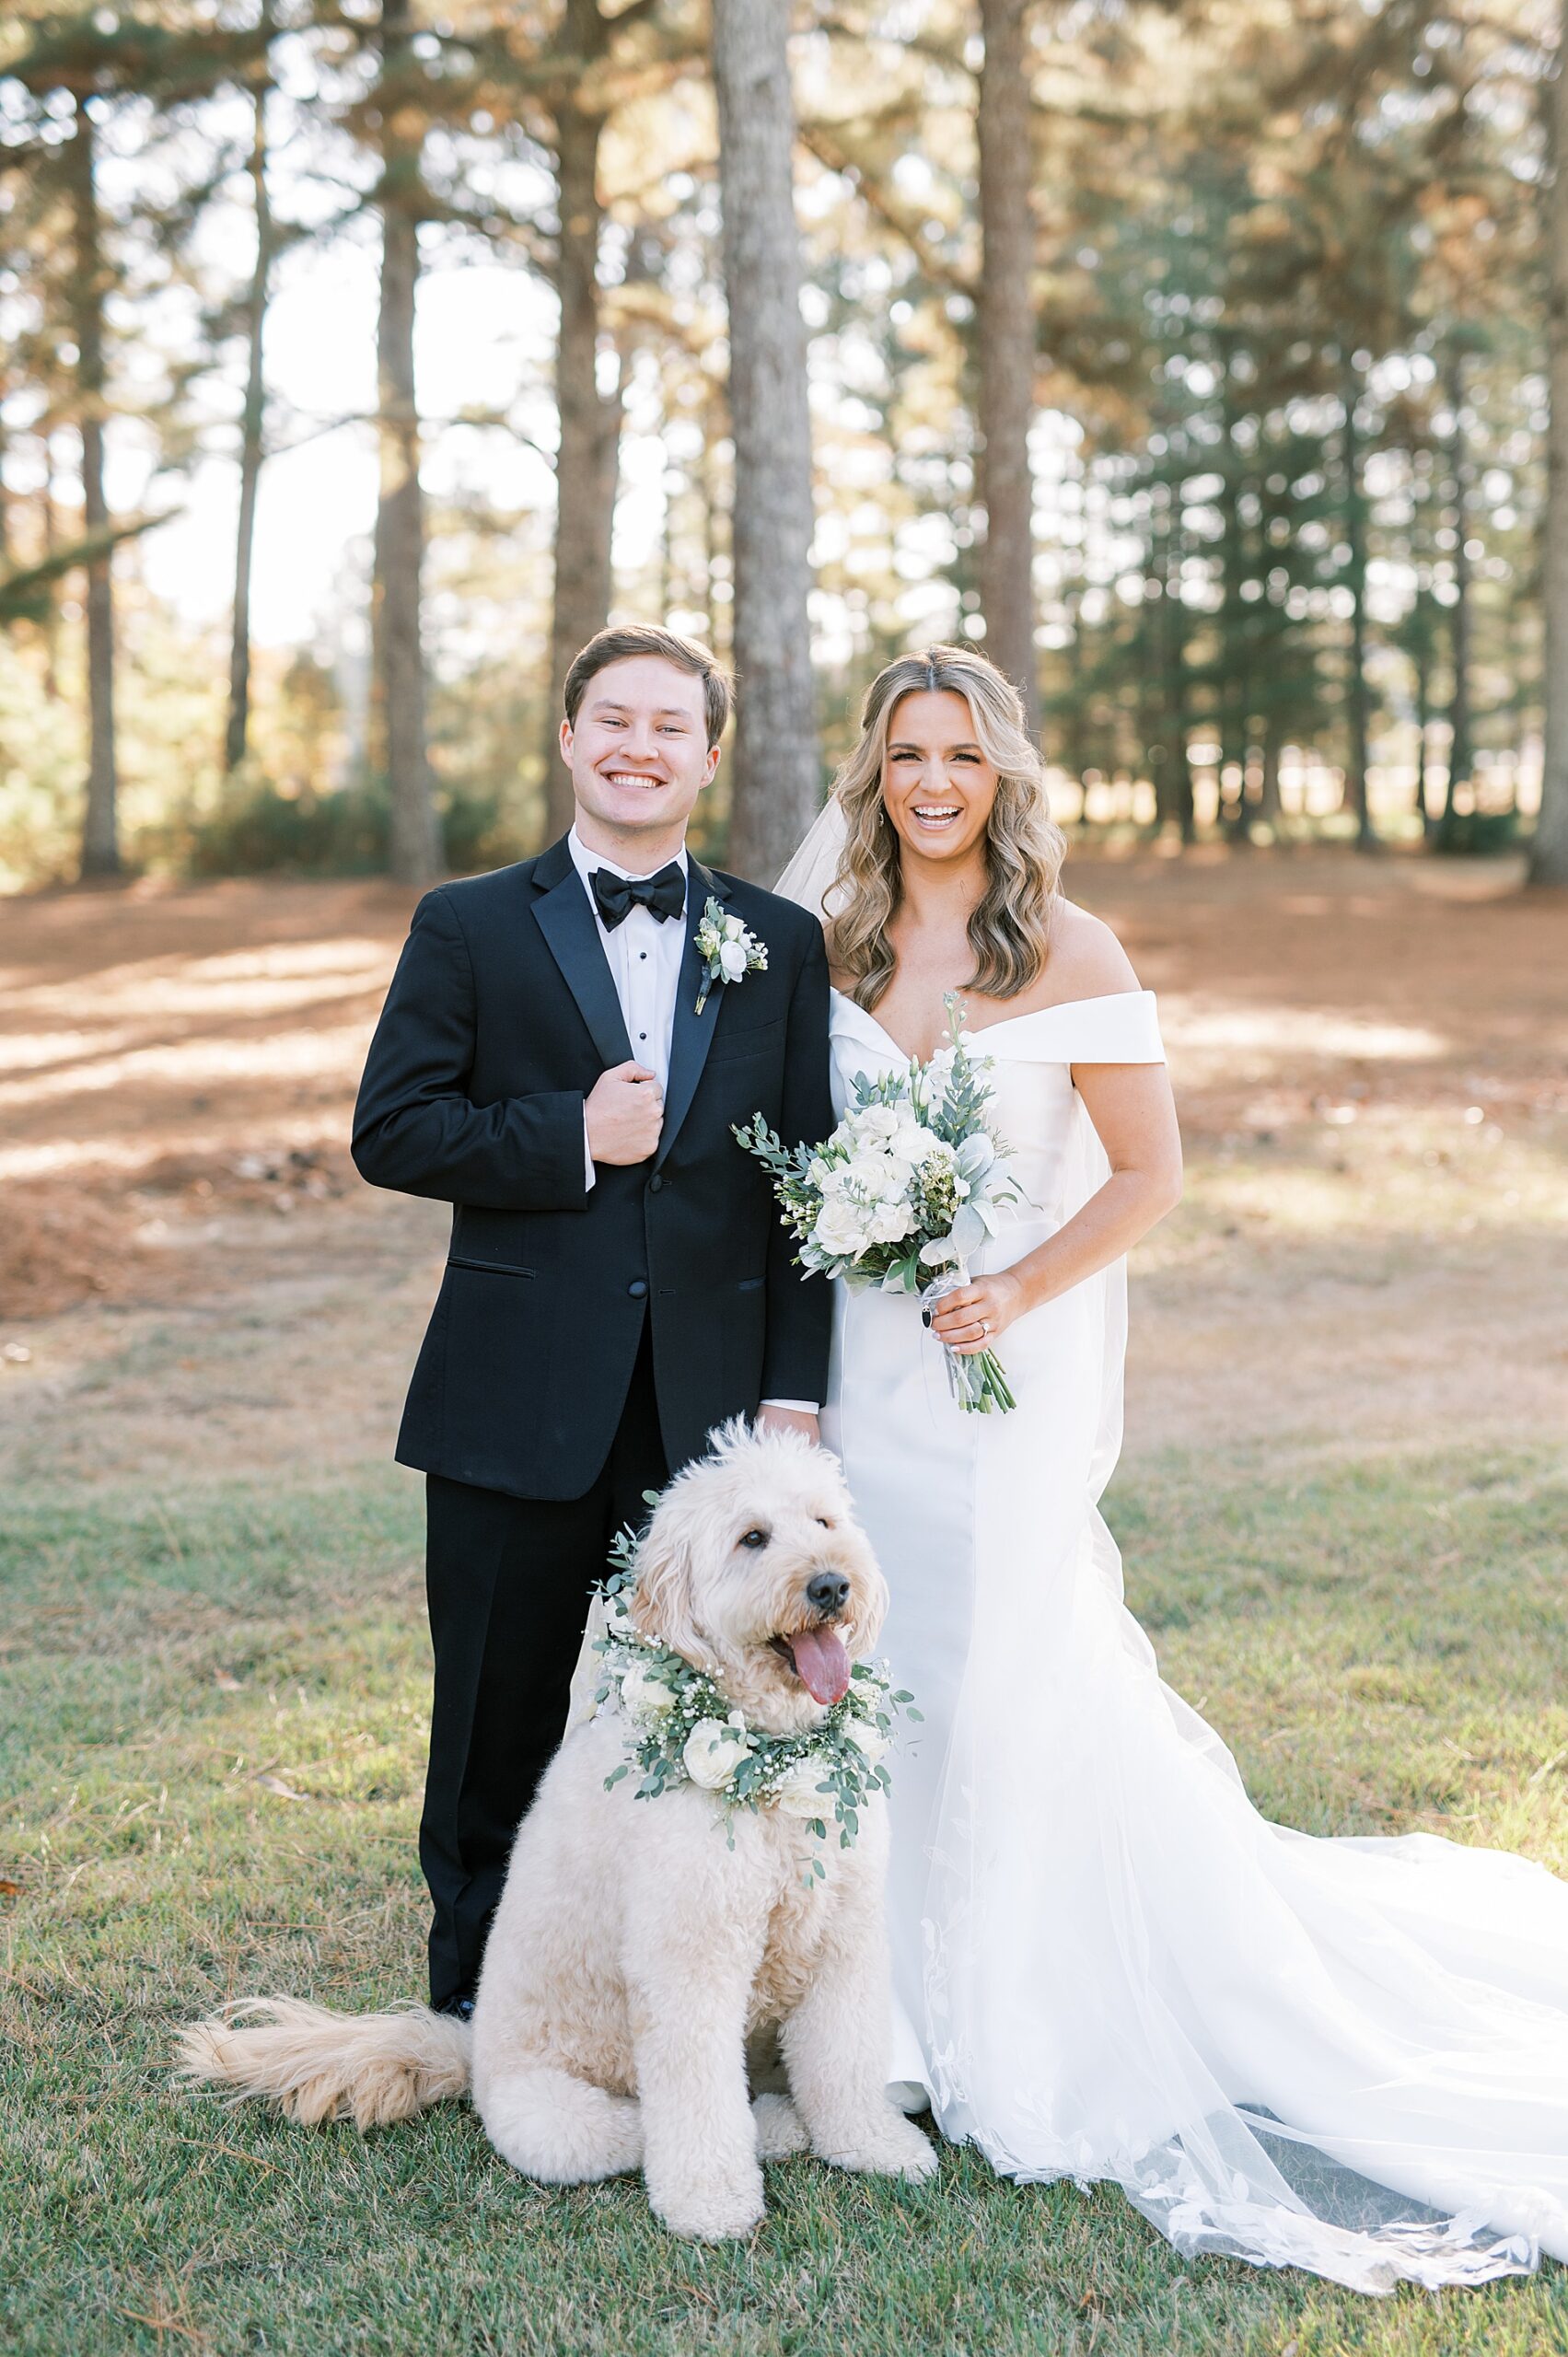 newlyweds with their dog after wedding ceremony at The Witt House